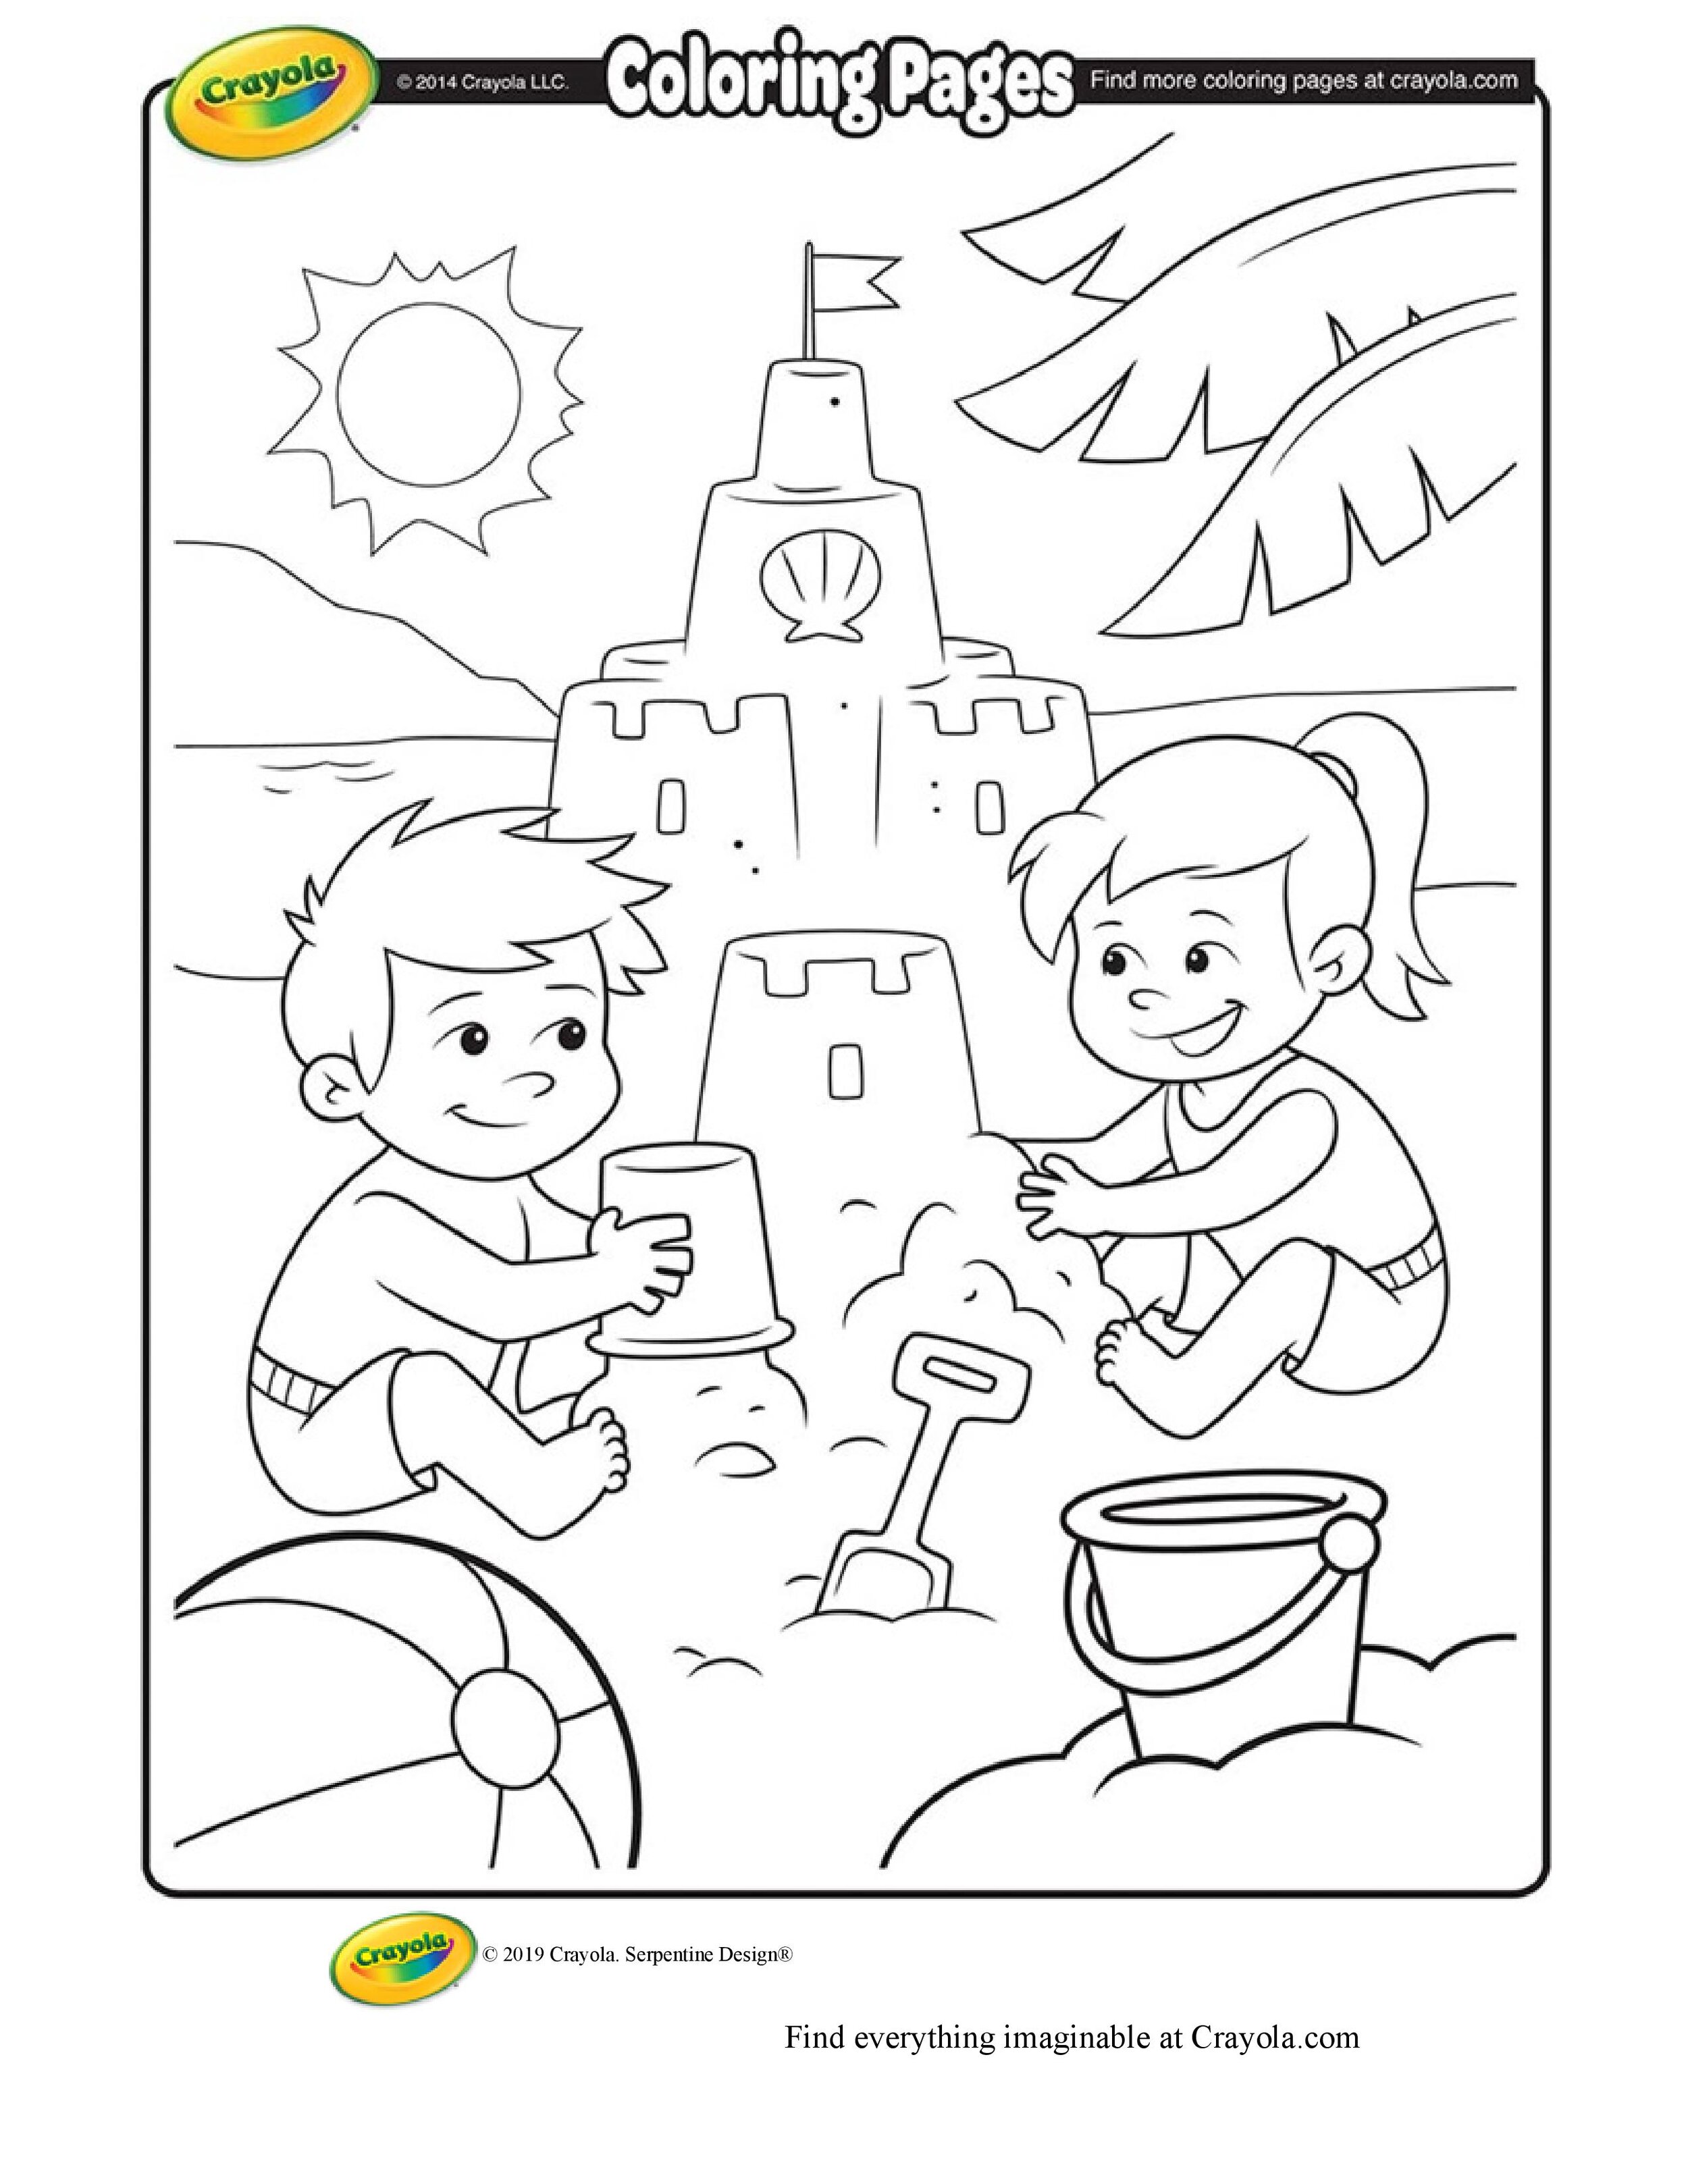 Fun at the Beach Coloring Page .jpg